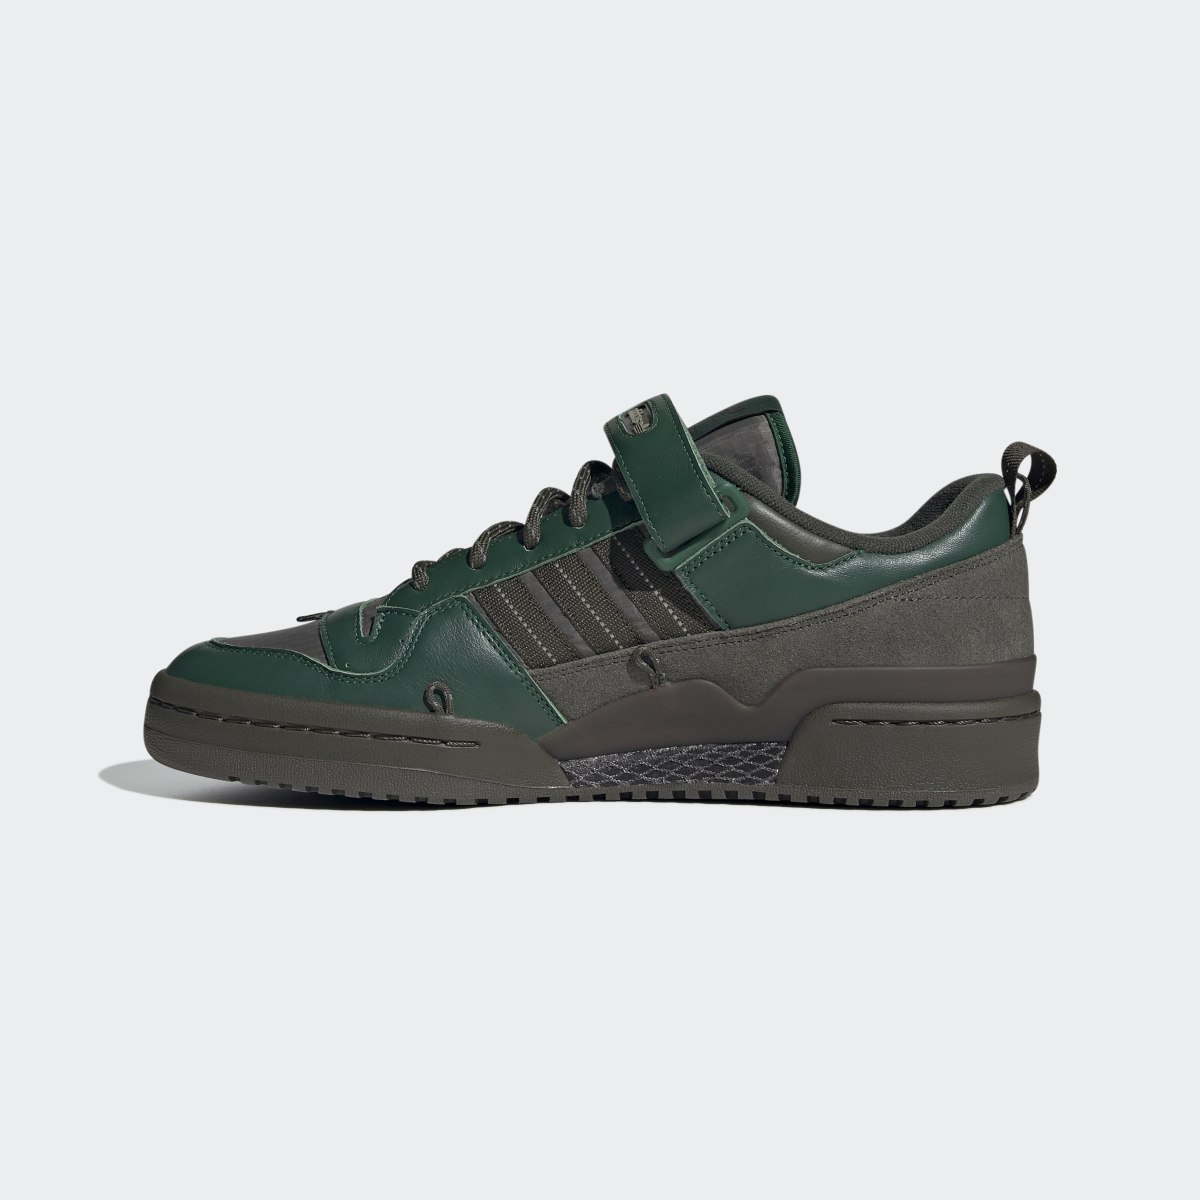 Adidas Forum 84 Camp Low Shoes. 9